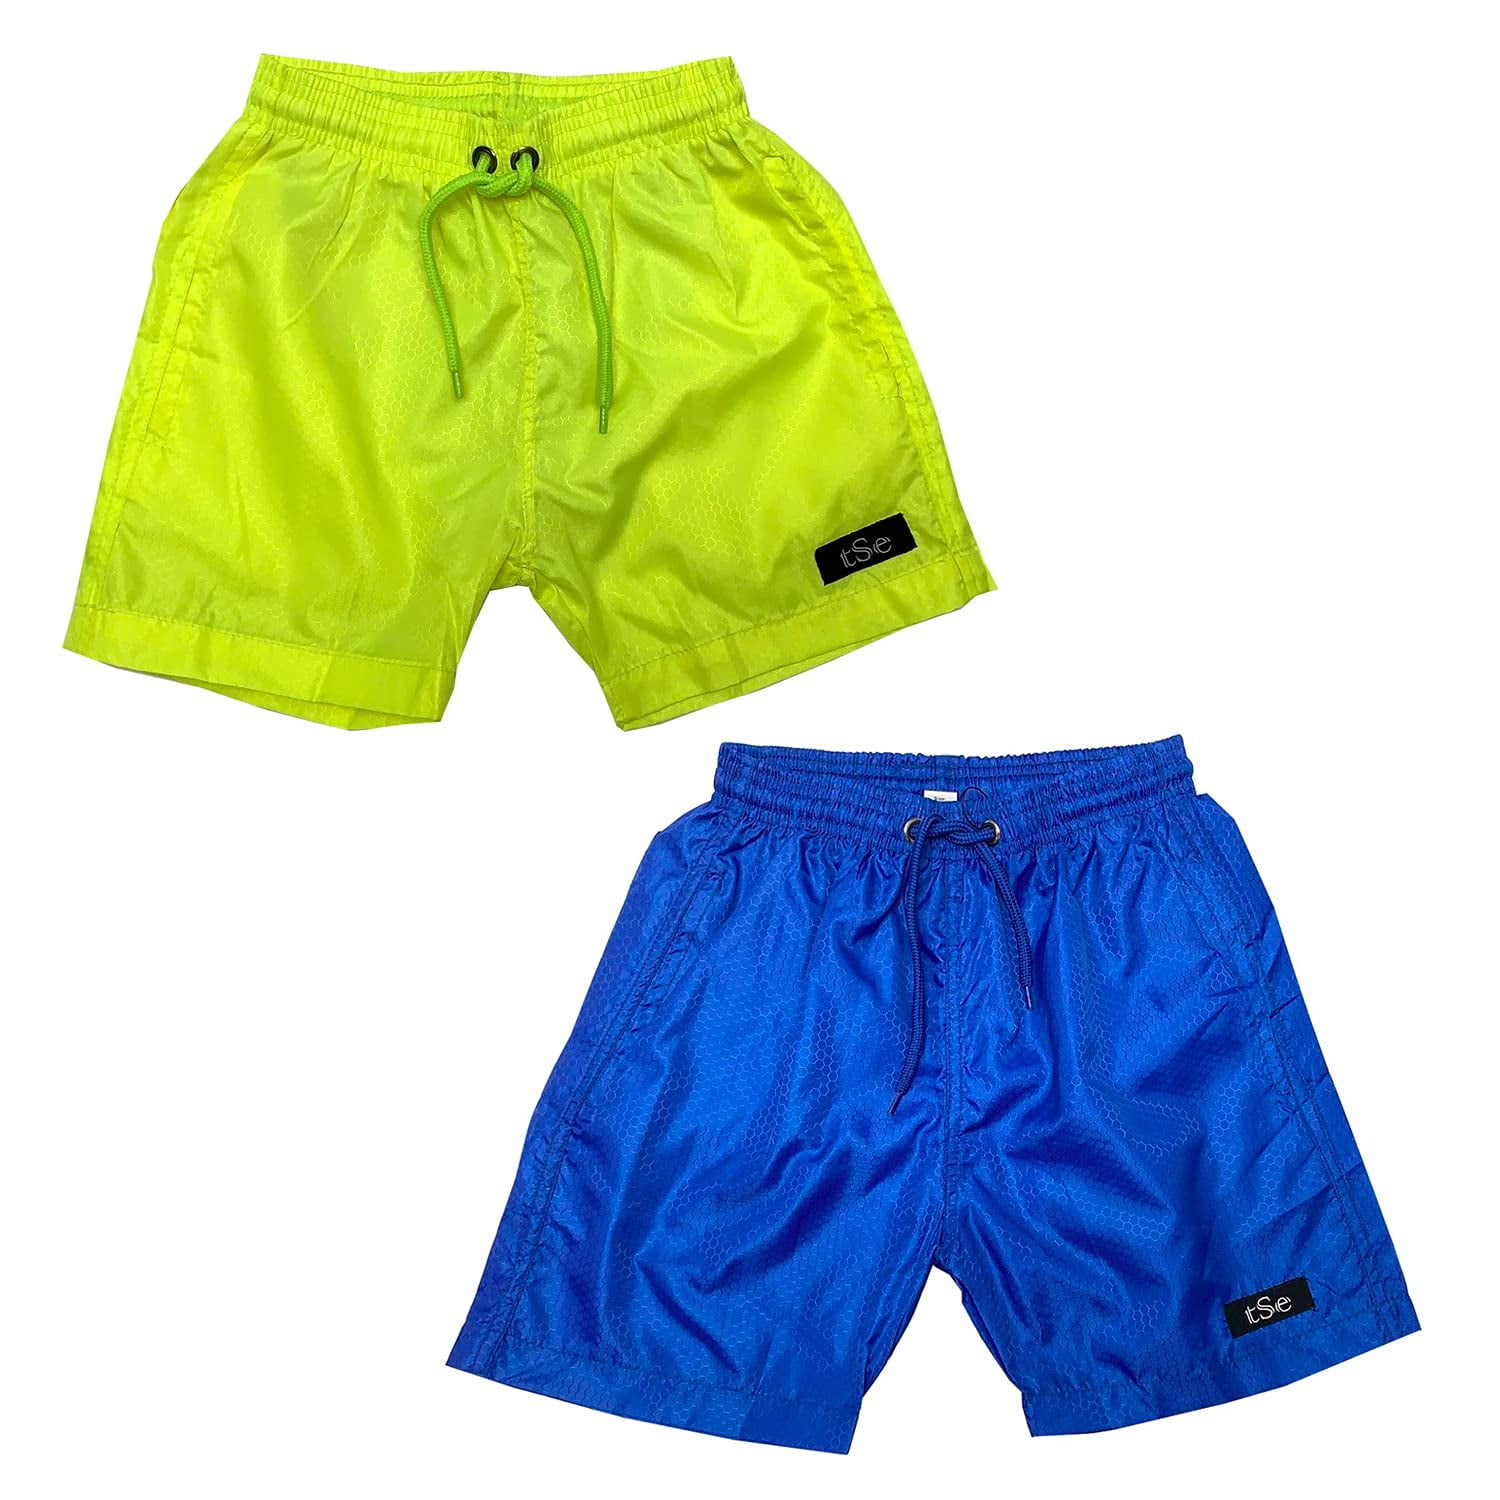 onderwerp wasserette duizelig Printed, Solid & Fluorescent Colored Quick Dry Swim Shorts for Boys and  Girls, Swim Trunks, Bathing Suits, Swimwear, Swim Shorts for Kids – 2pc –  Green/Blue, 9-10T - Walmart.com